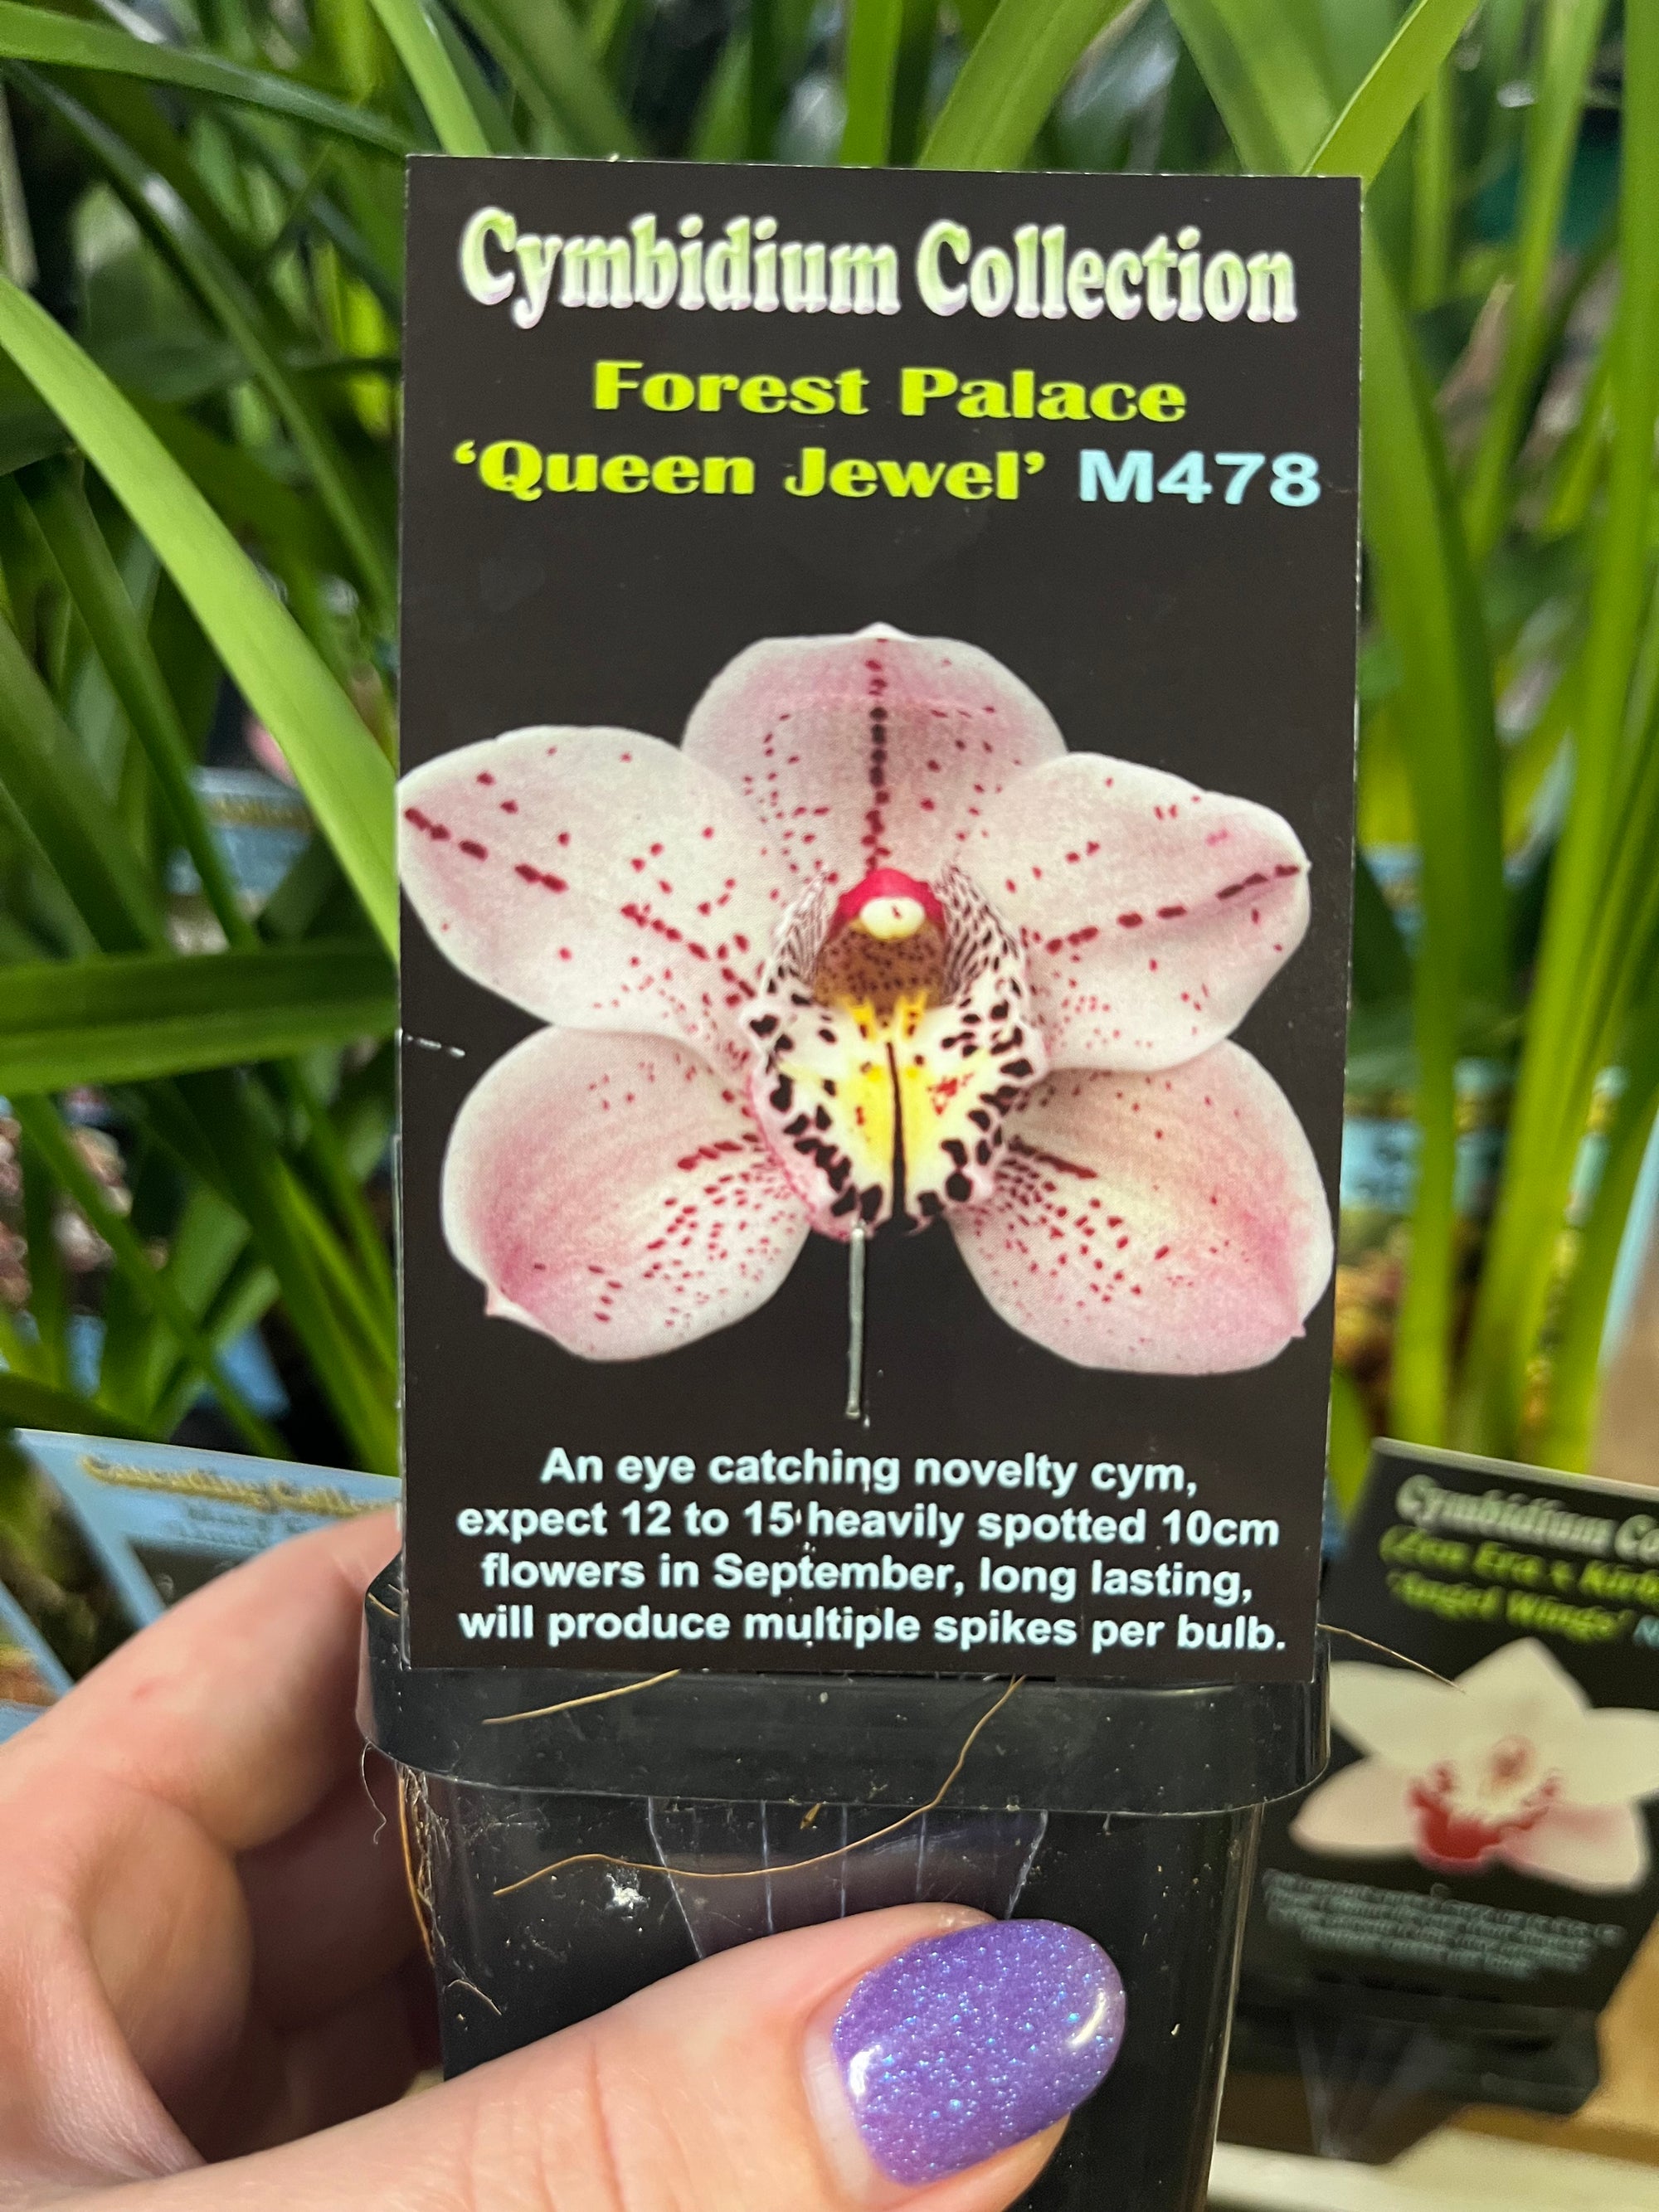 Cymbidium Collection - Forest Palace 'Queen Jewel' M478